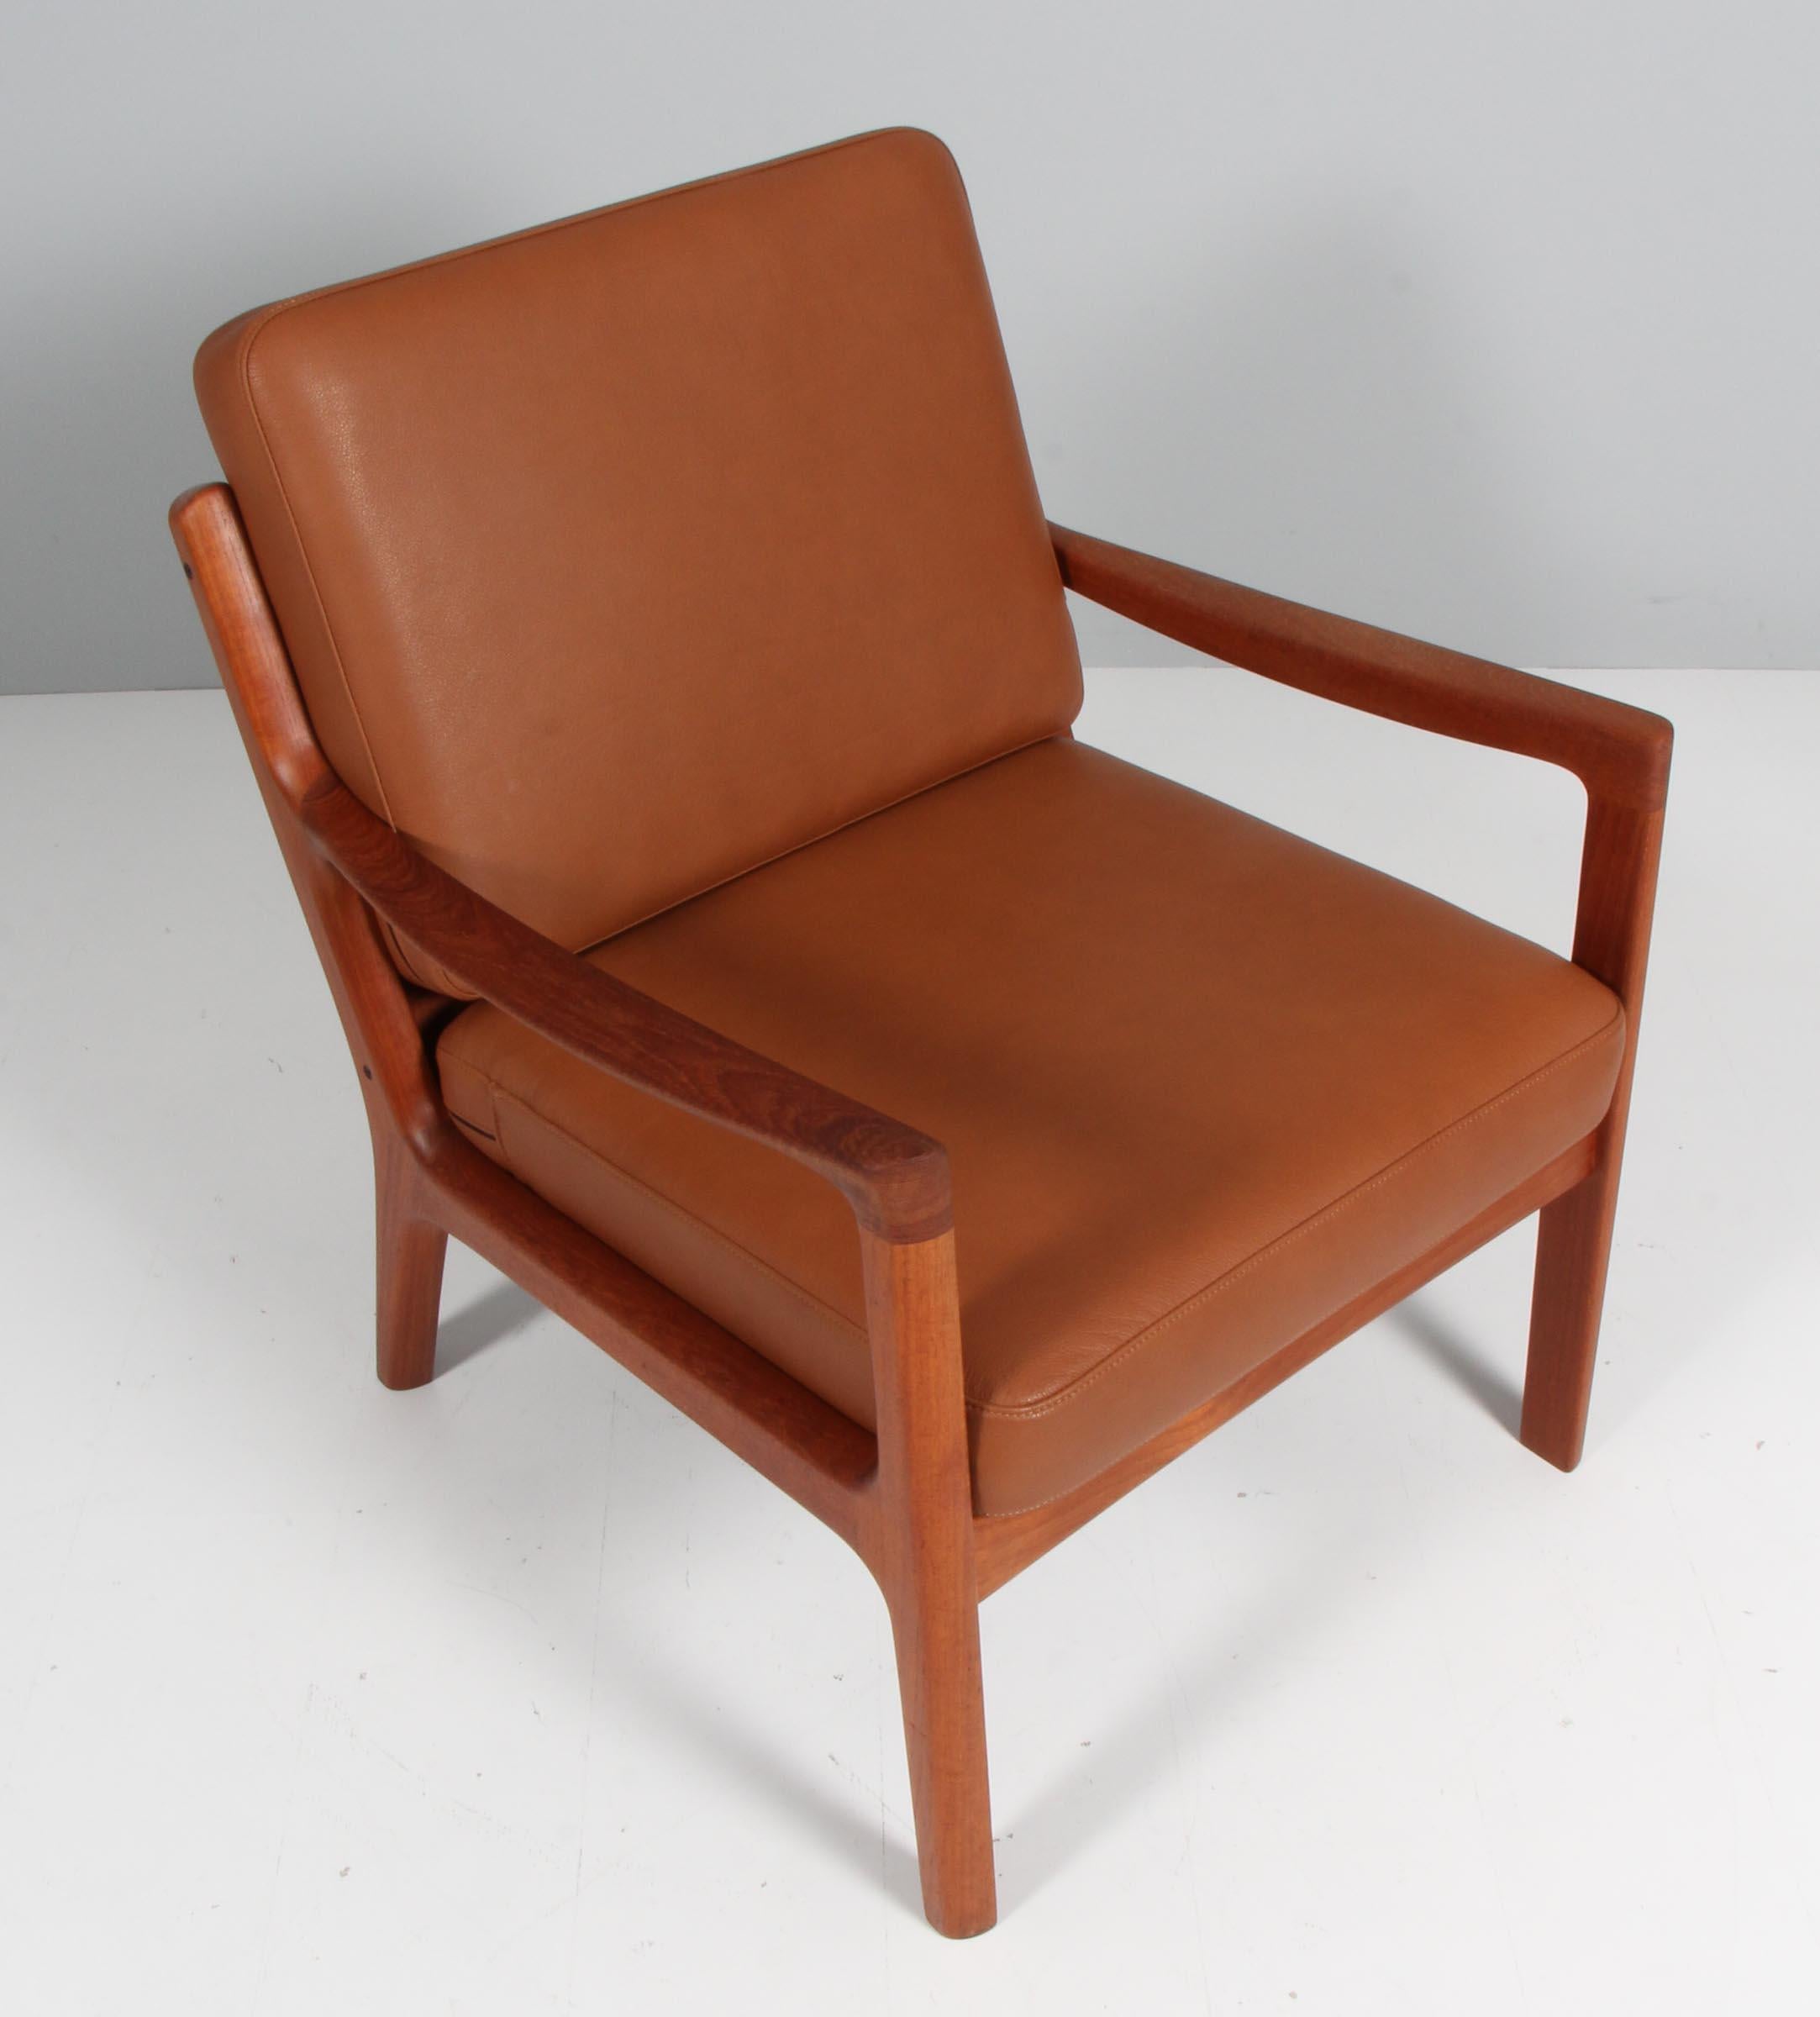 Ole Wanscher lounge new upholstered with cognac pure aniline leather

Made of solid teak.

Model senator, made by Cado.